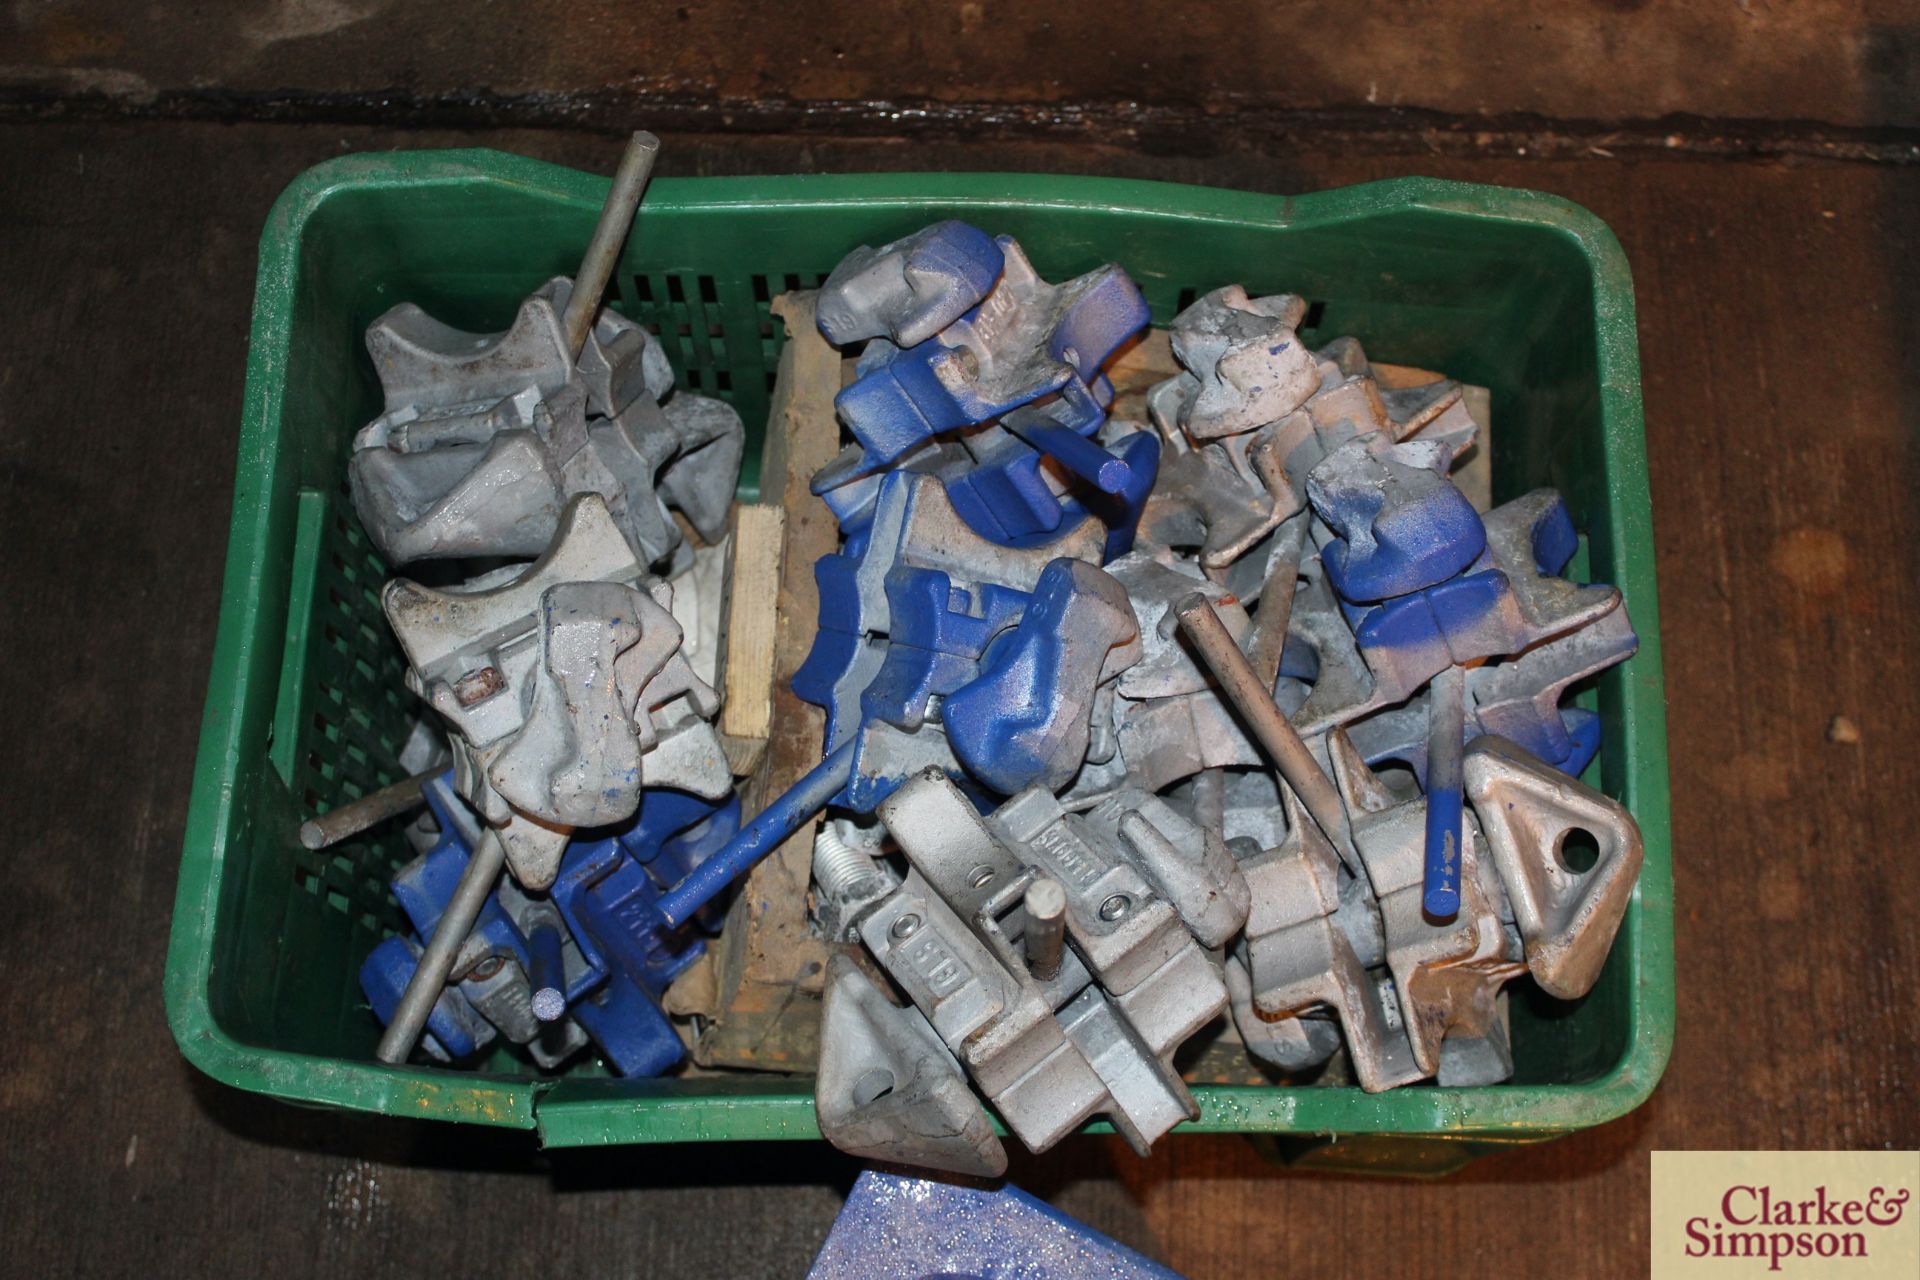 Quantity of ISO locks for containers and container blocks. - Image 2 of 3